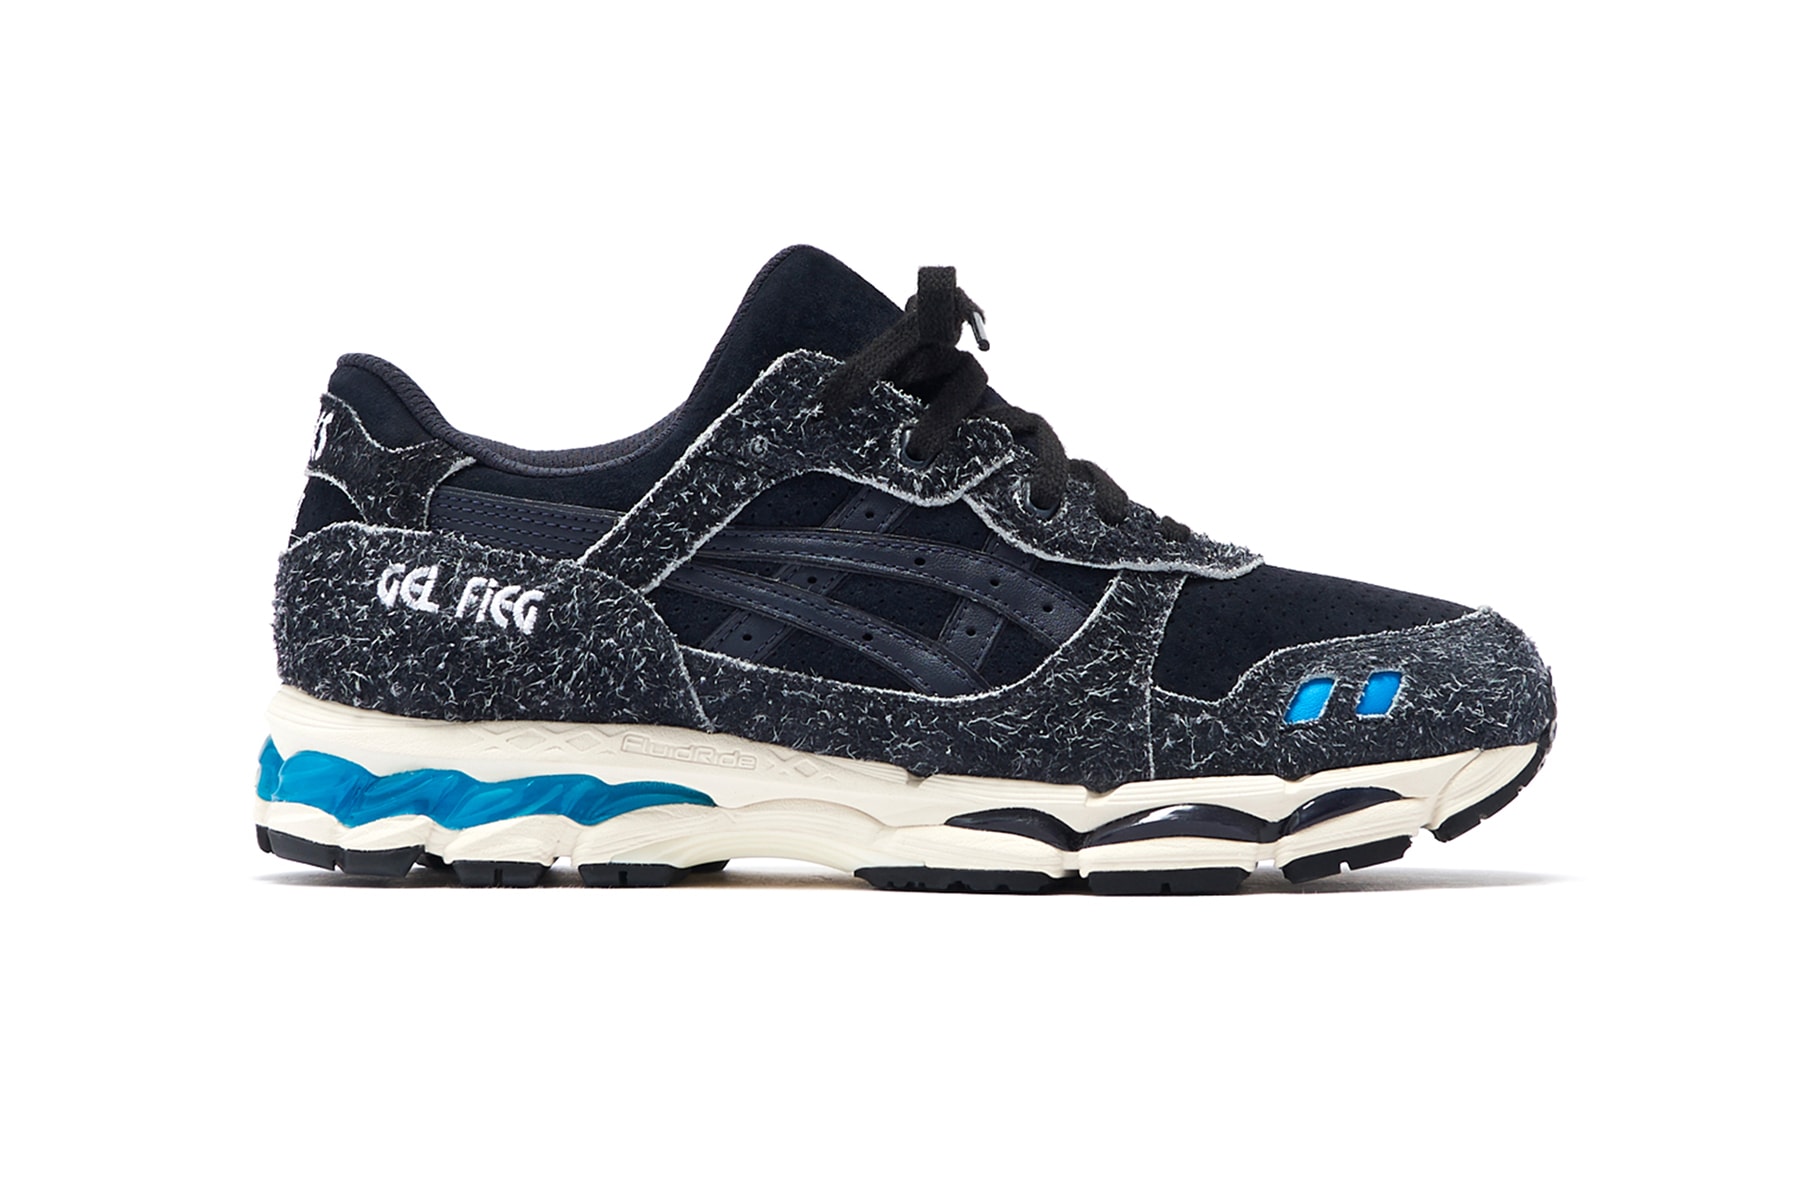 Ronnie Fieg x ASICS “Super Blue” GEL-Lyte III 10th anniversary collaboration preview footwear sneakers Ronnie Fieg x ASICS Super Blue 10th Anniversary Capsule release